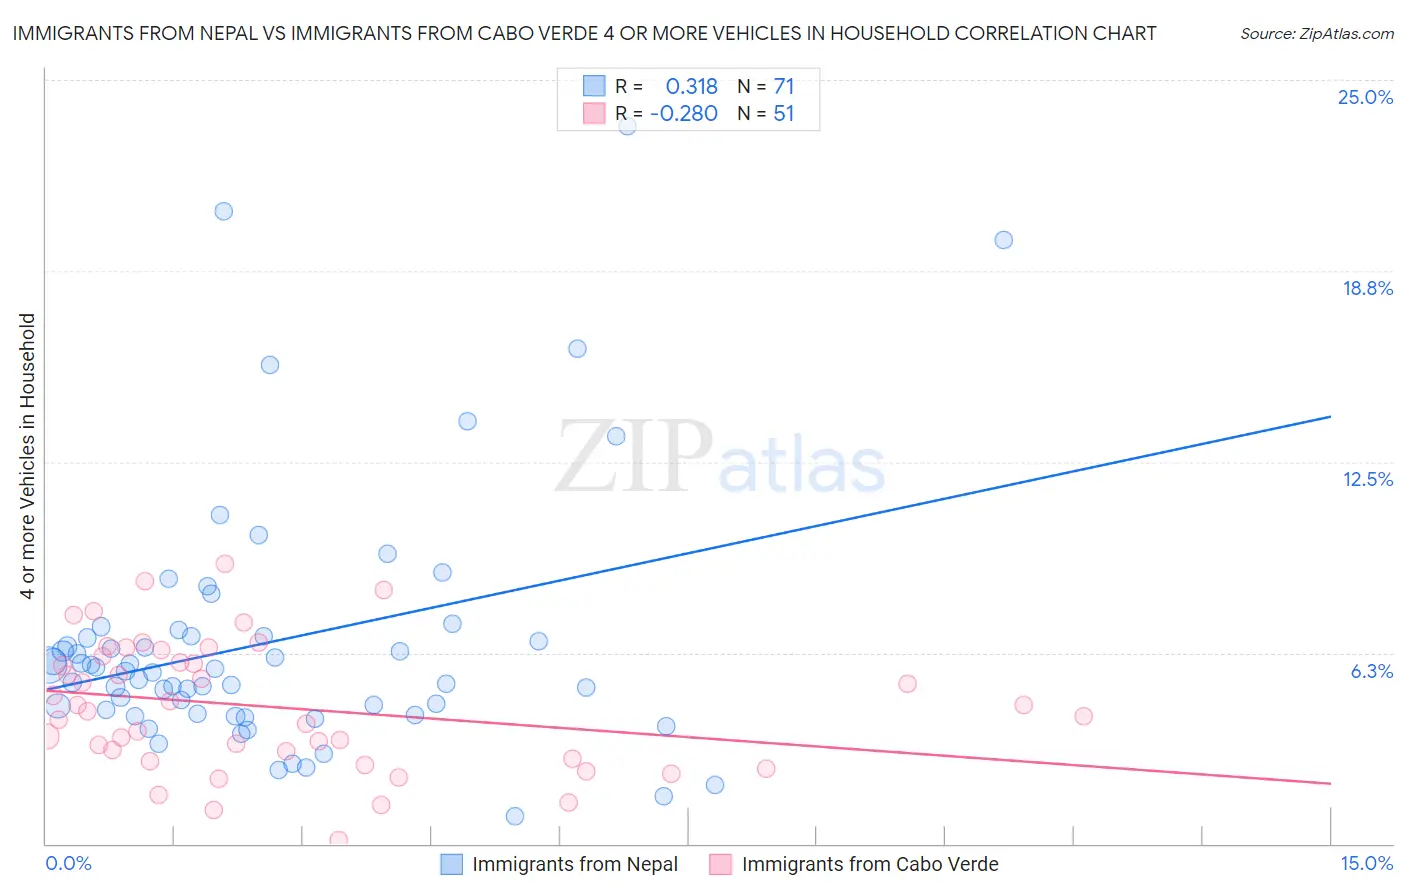 Immigrants from Nepal vs Immigrants from Cabo Verde 4 or more Vehicles in Household